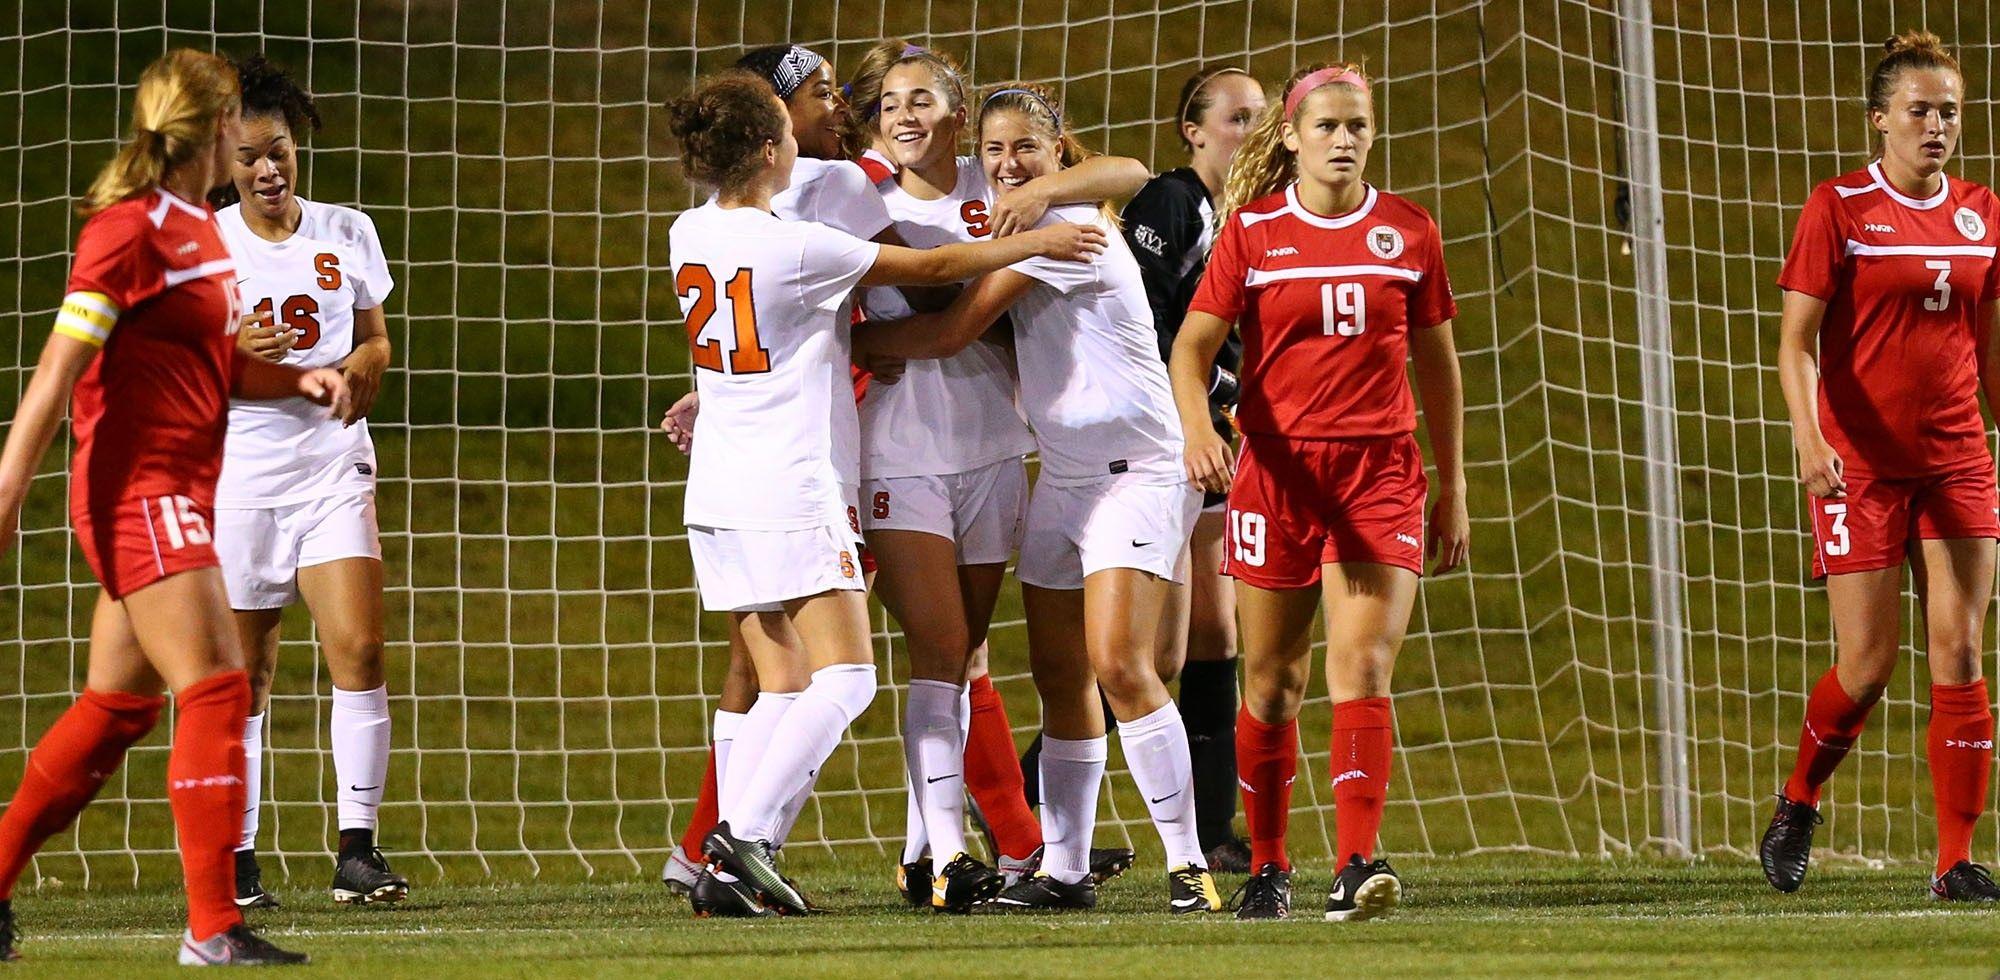 Cornell Soccer Logo - Orange Open Home Stand with Shutout Victory - Syracuse University ...